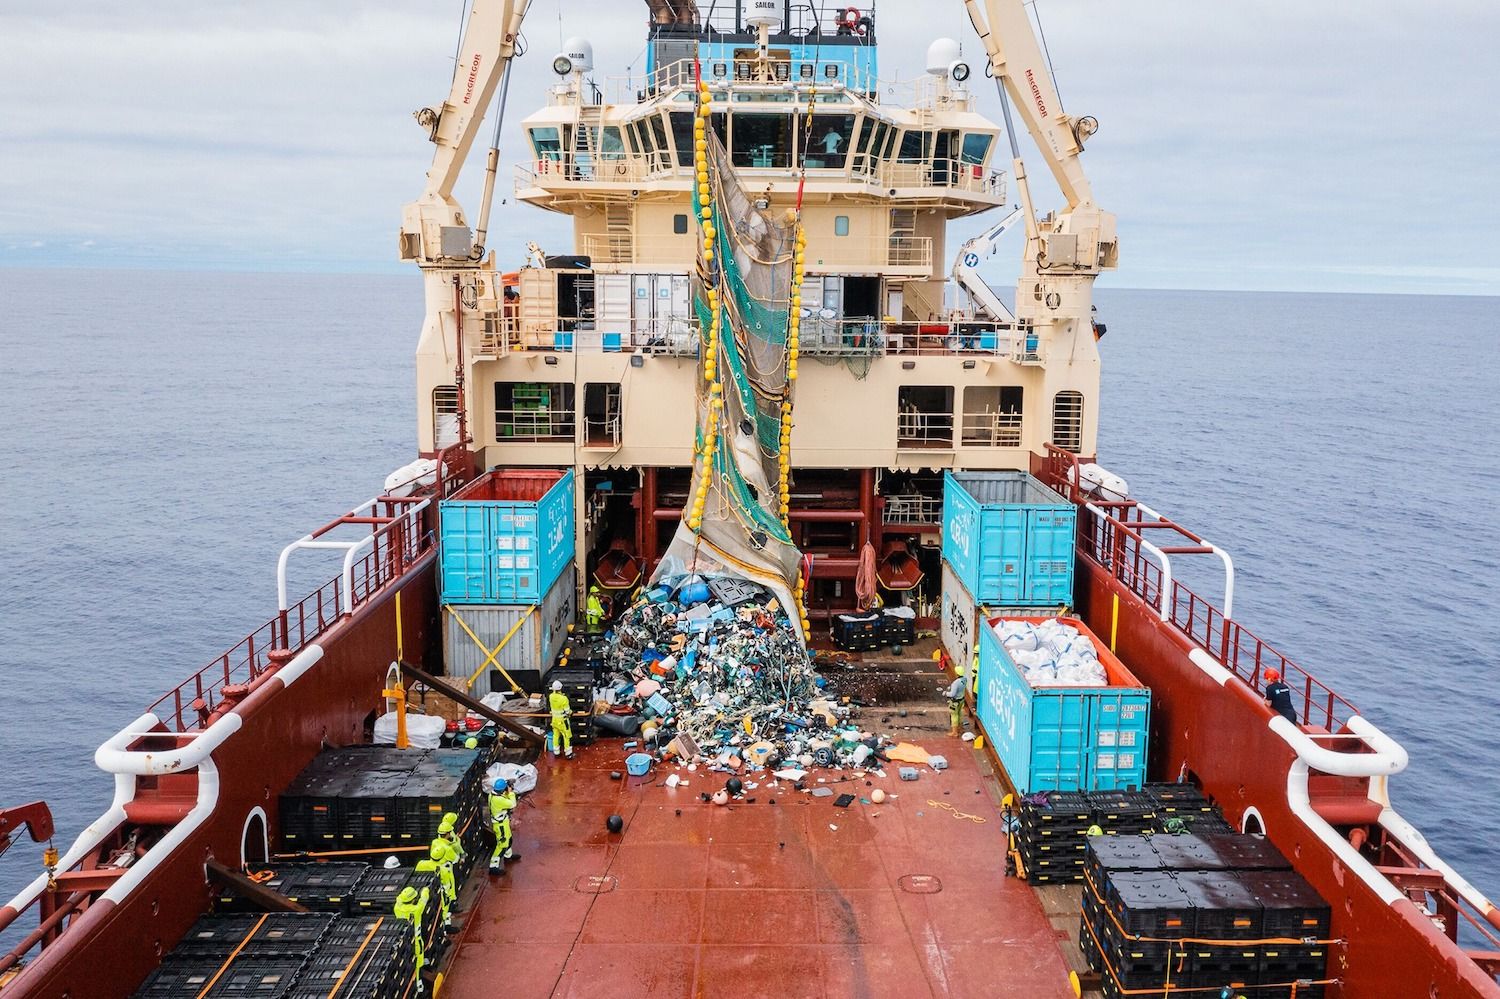 Trash collected by the vessels of The Great Ocean Cleanup